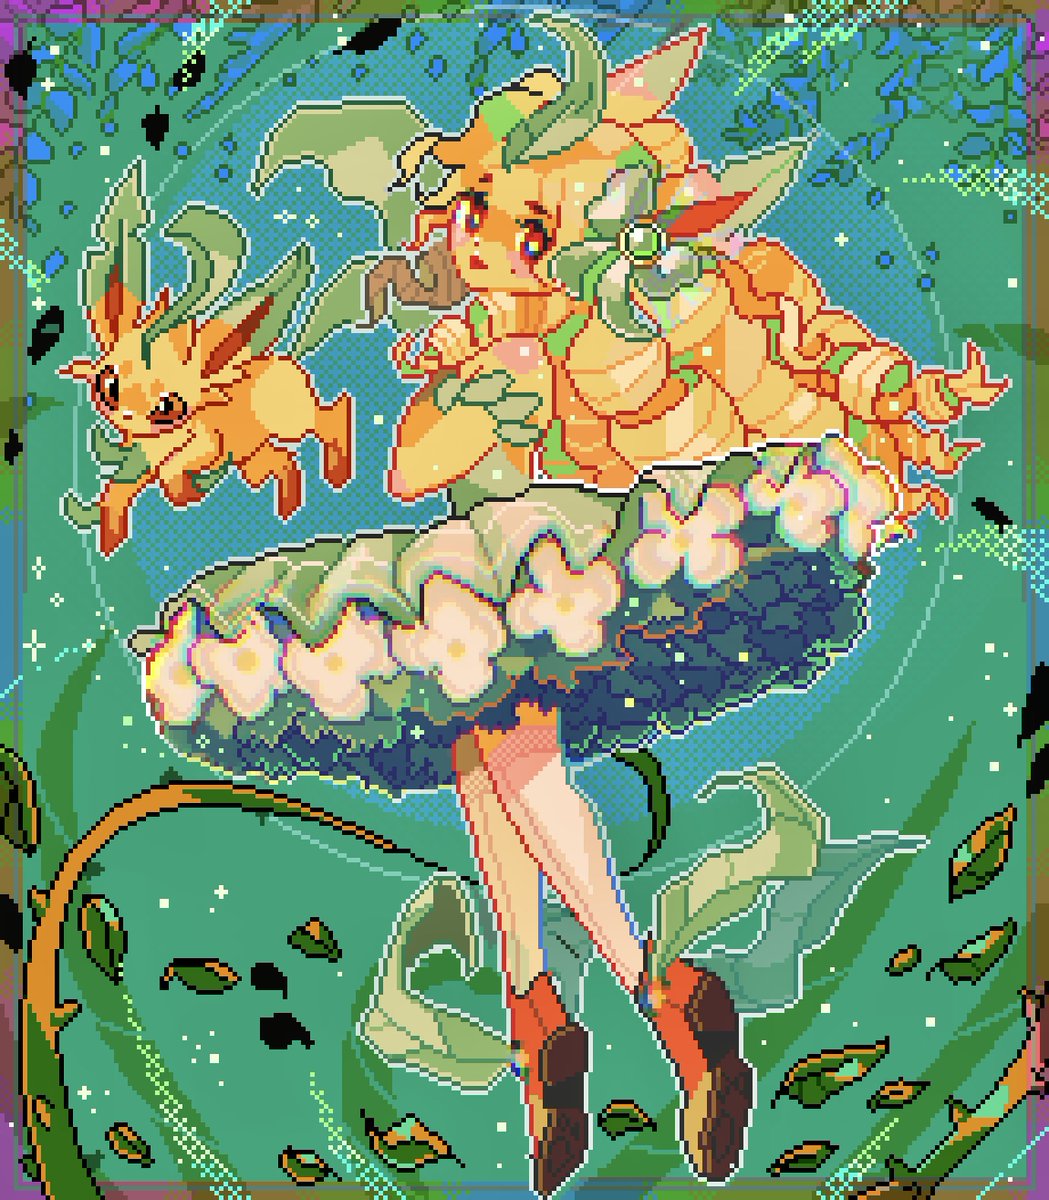 ✨ My magical girl eevee series so far - espeon, umbreon, glaceon and leafeon!